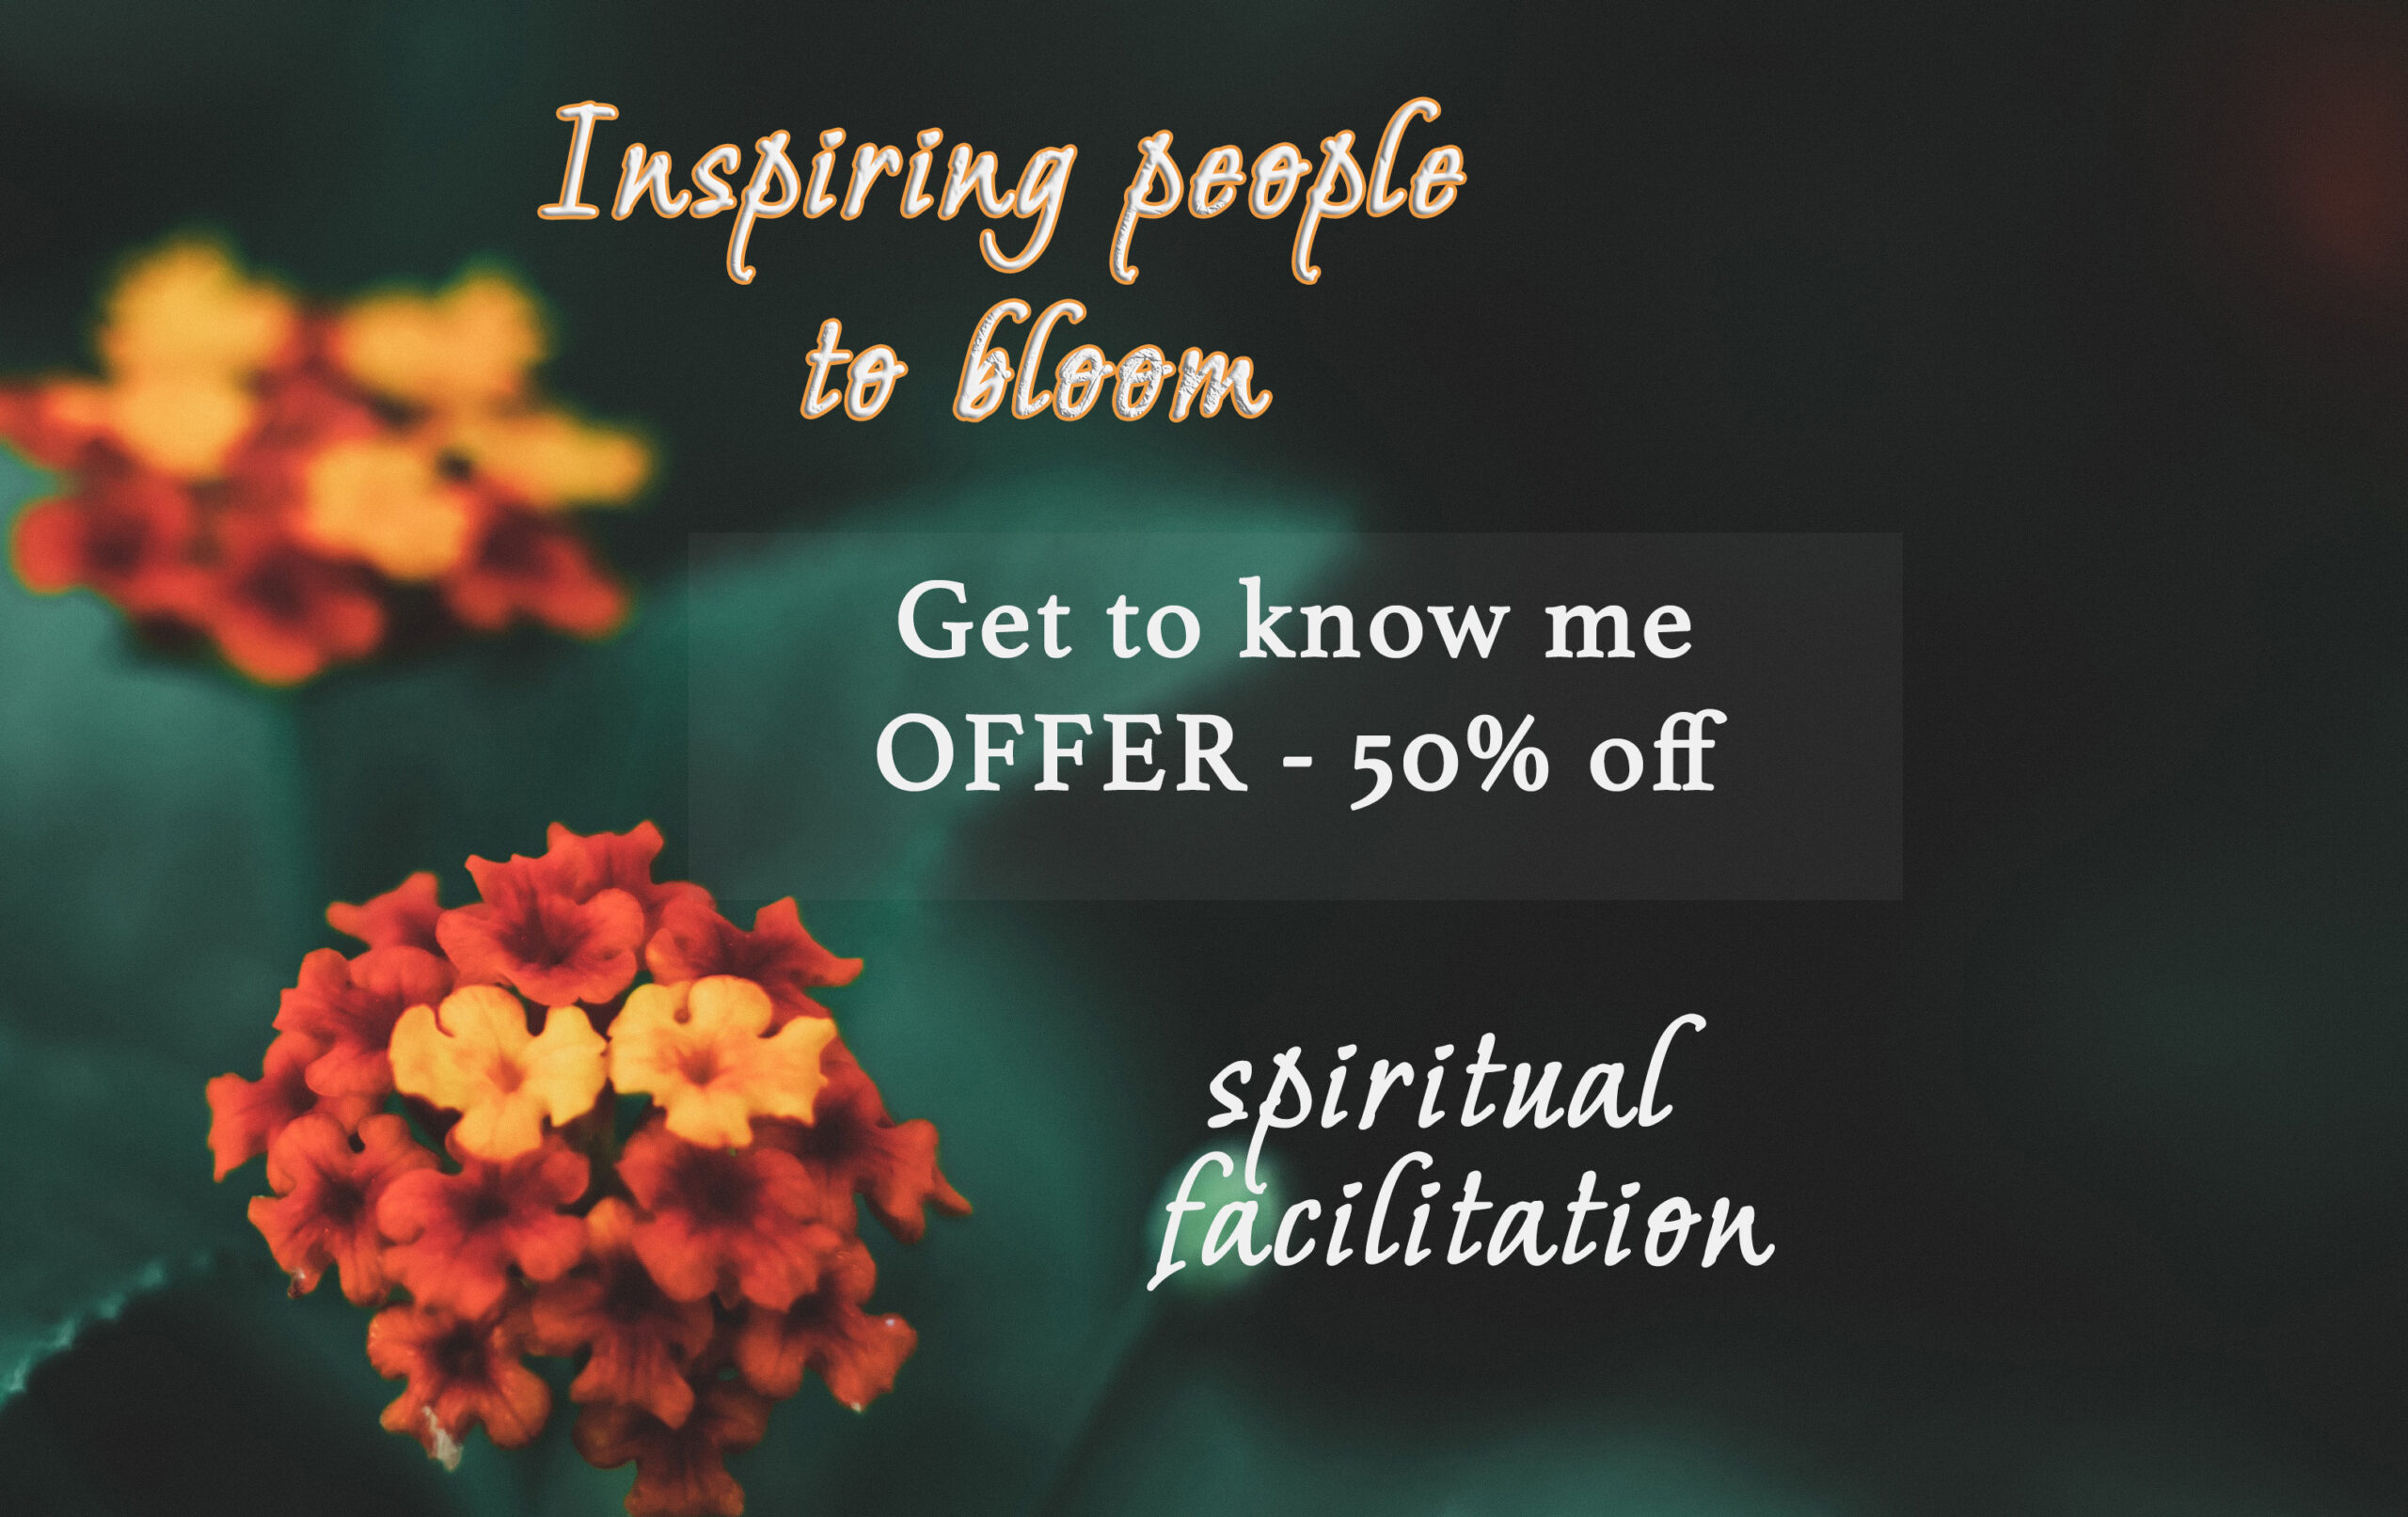 Get to know me – OFFER – 50% off on your first online session